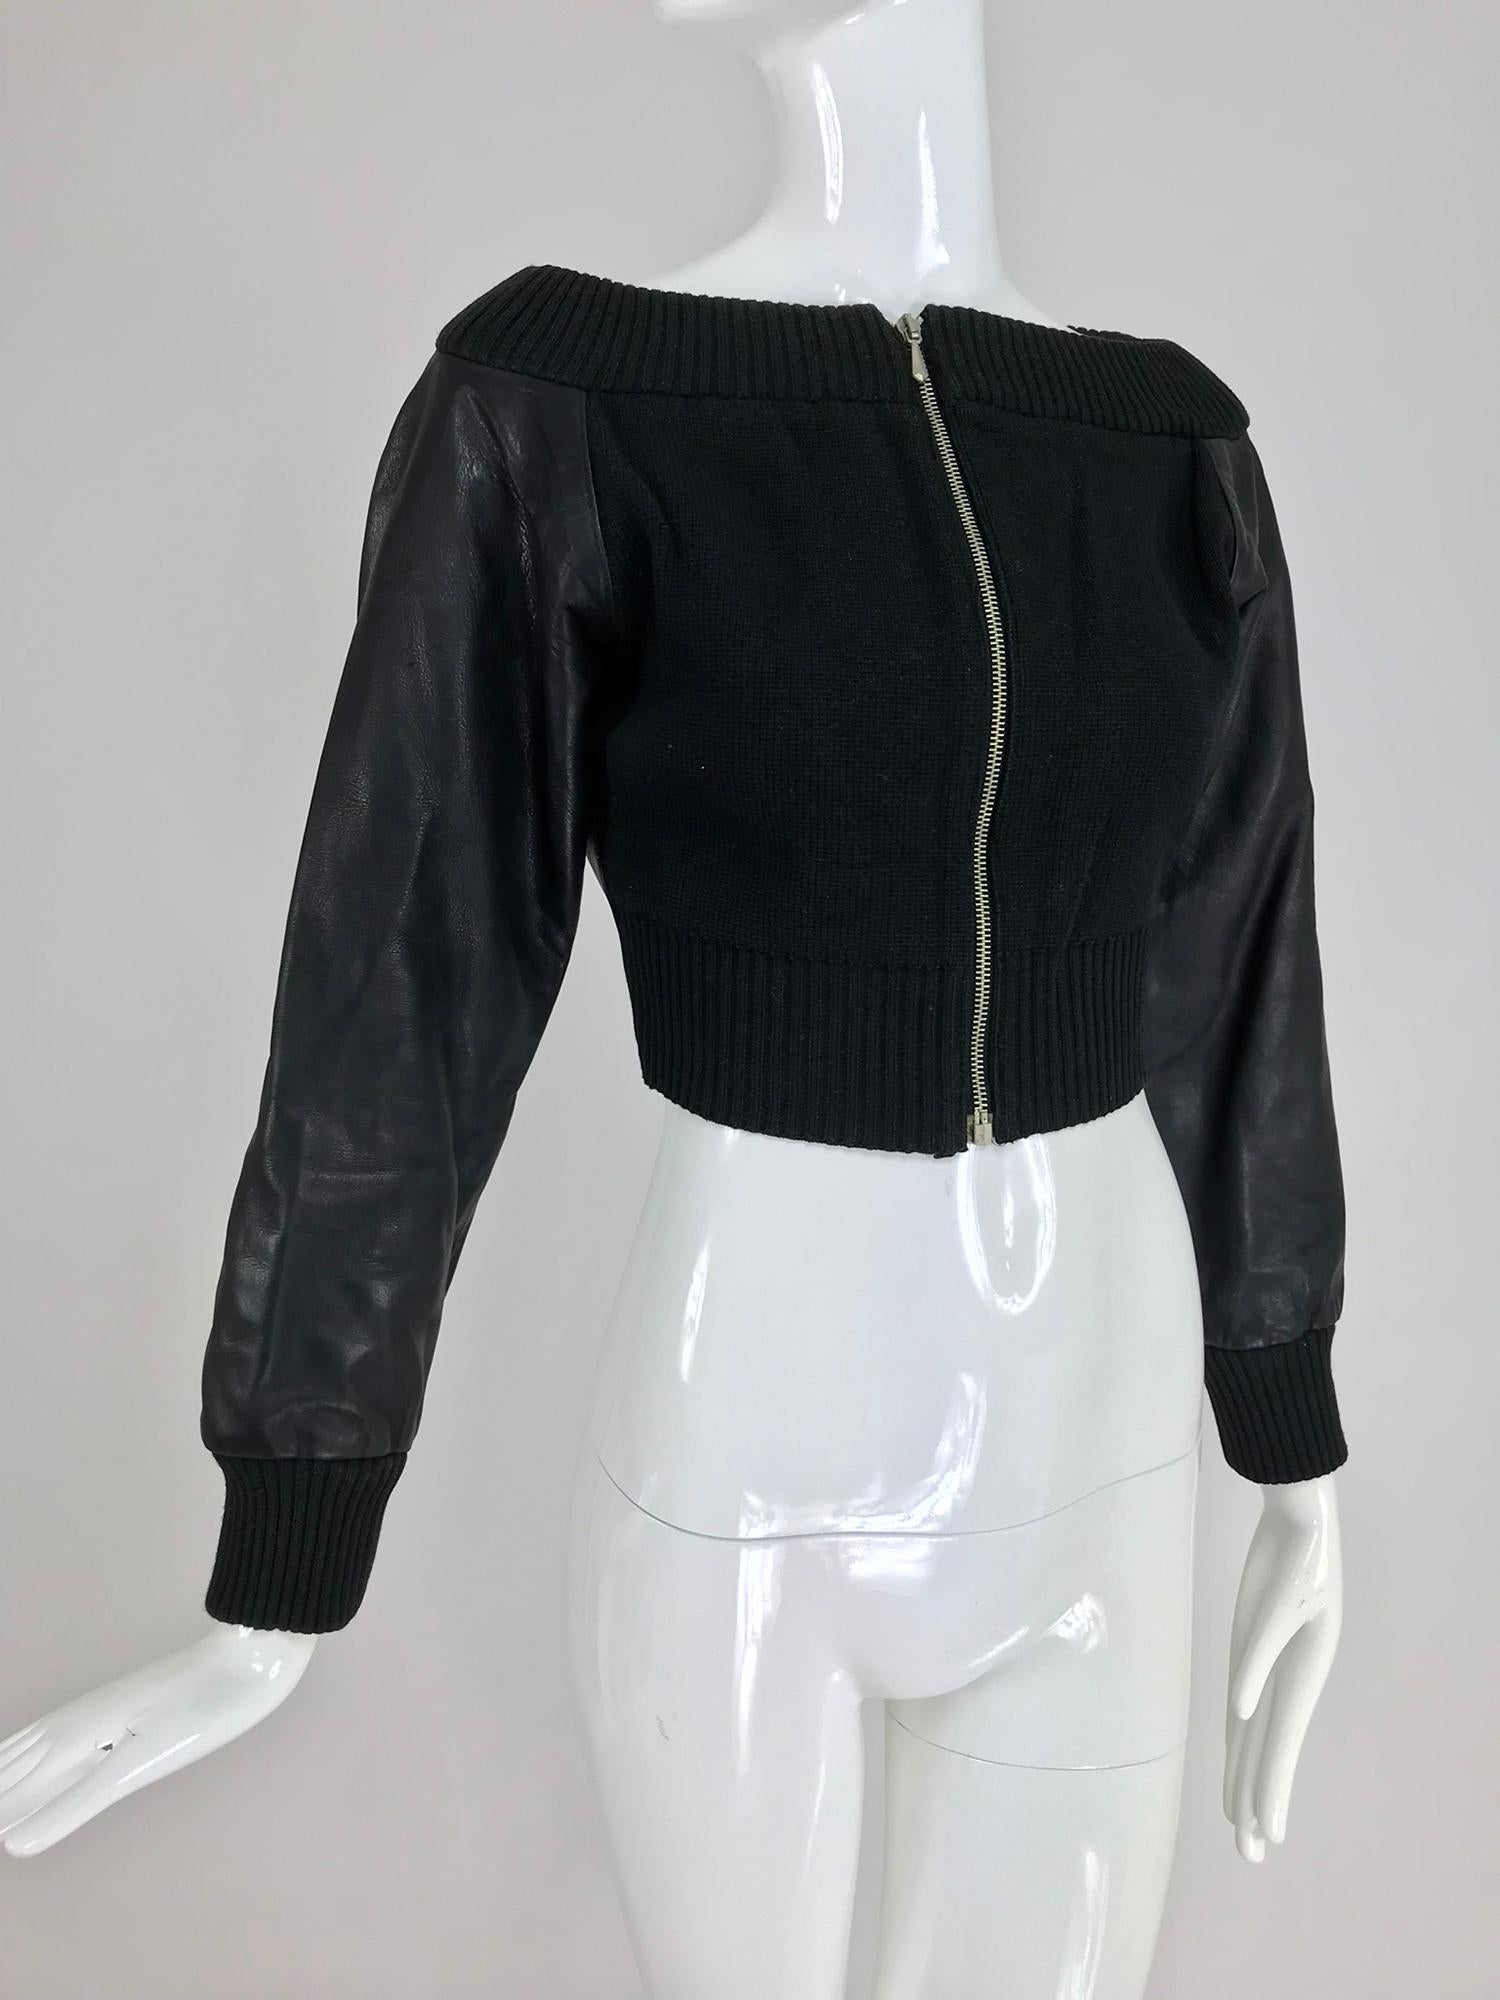 Jean Paul Gaultier black leather and black Knit Off the Shoulder Jacket from the 1990s. The cropped, fitted long raglan sleeve jacket has black leather sleeves and back with knit front panels, a rib knit shoulder band and rib knit cuffs, it closes